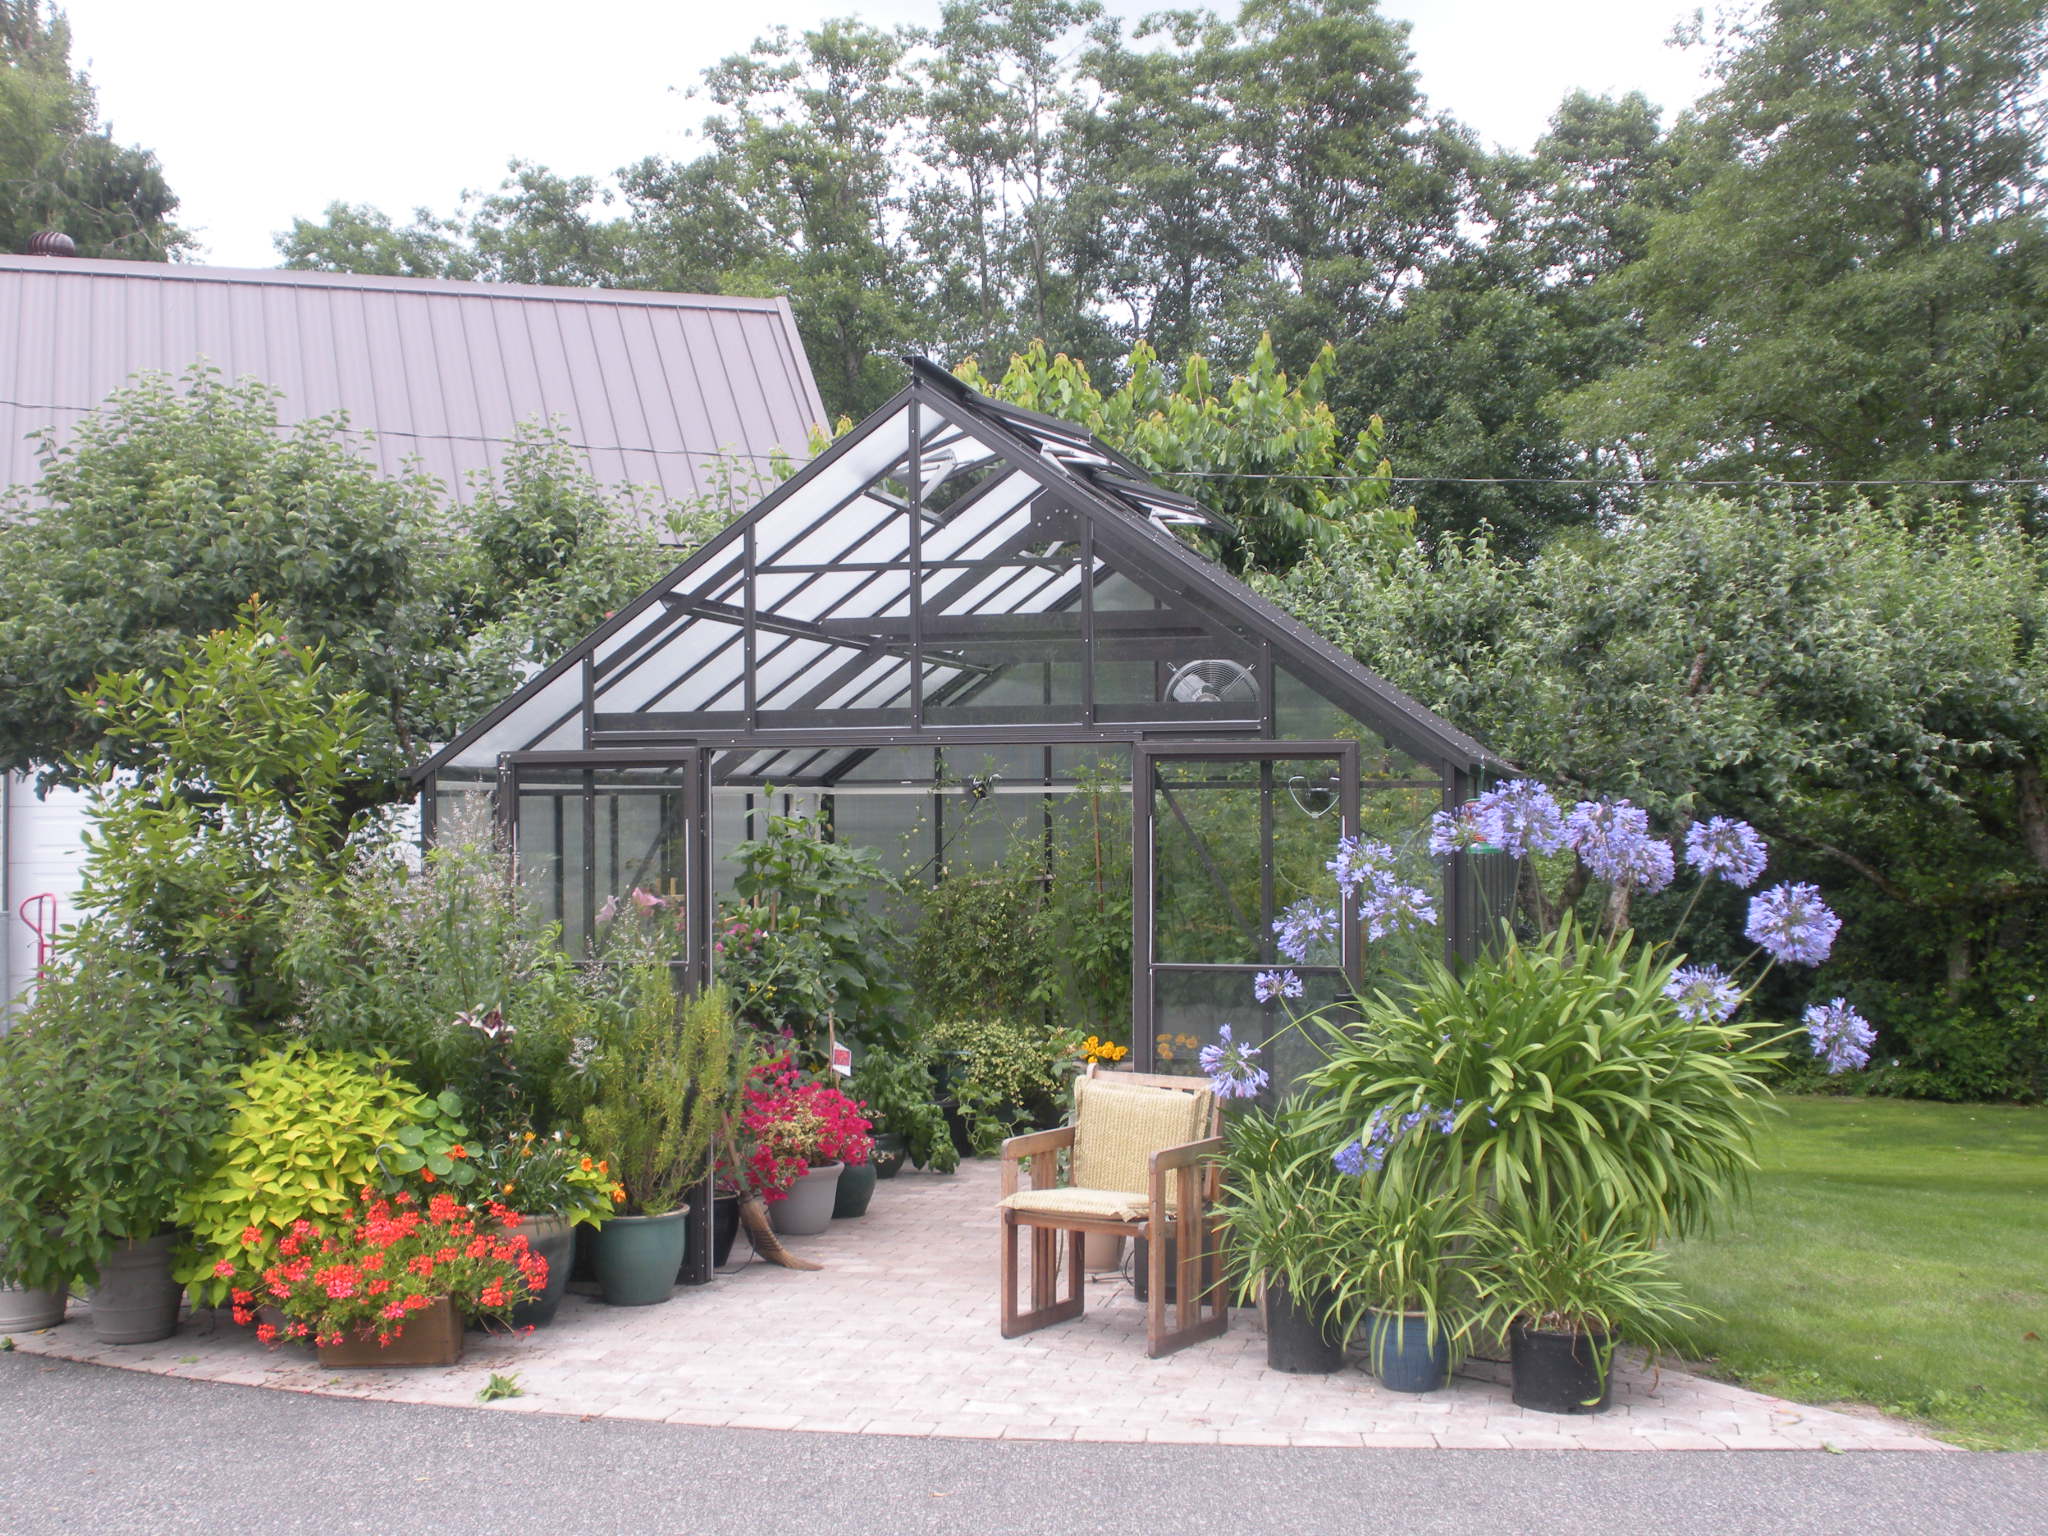 Traditional greenhouse with flowers surrounding the entry